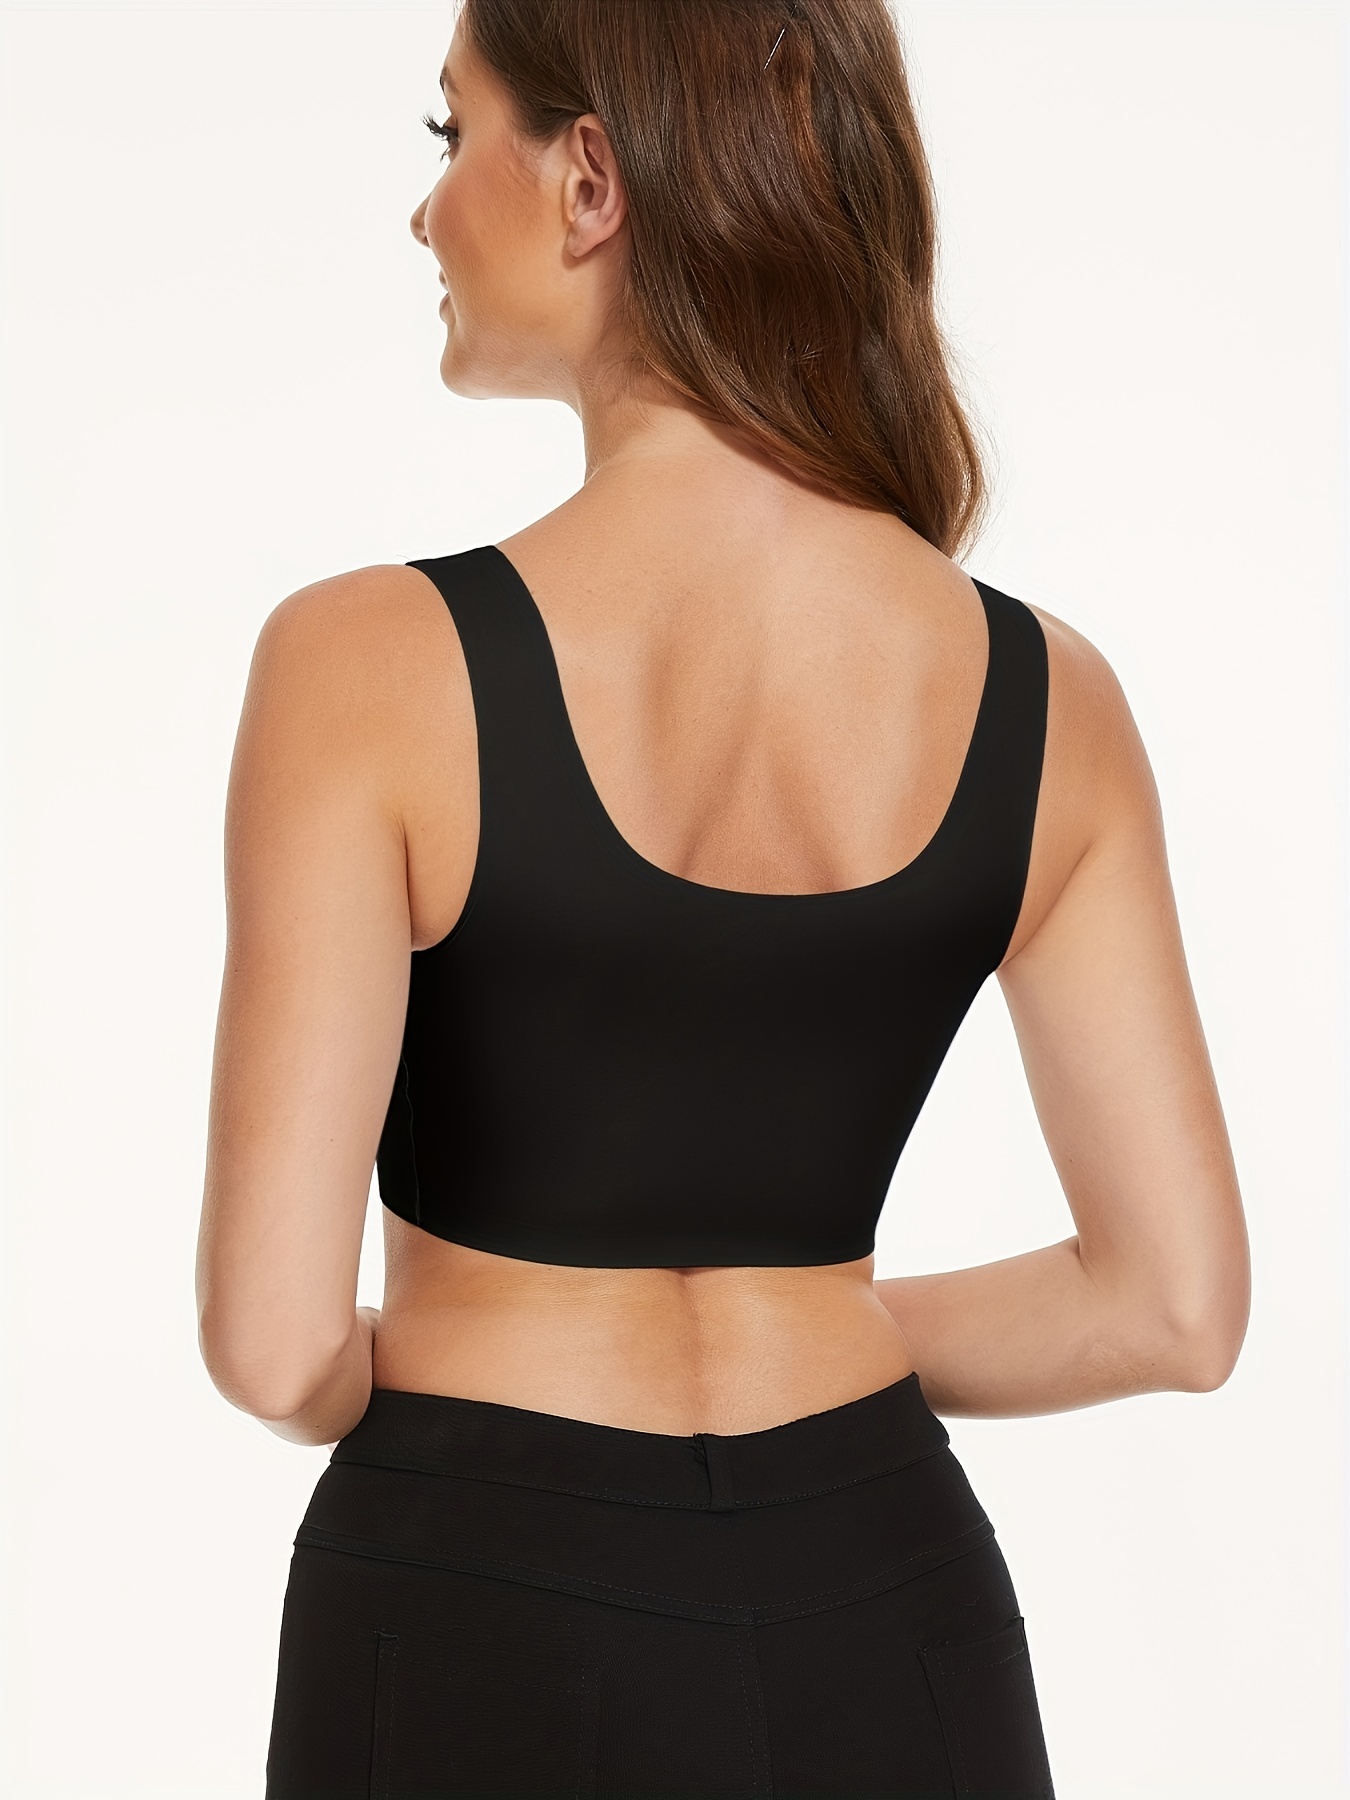  Sports Bras for Women,Seamless Comfortable Sports